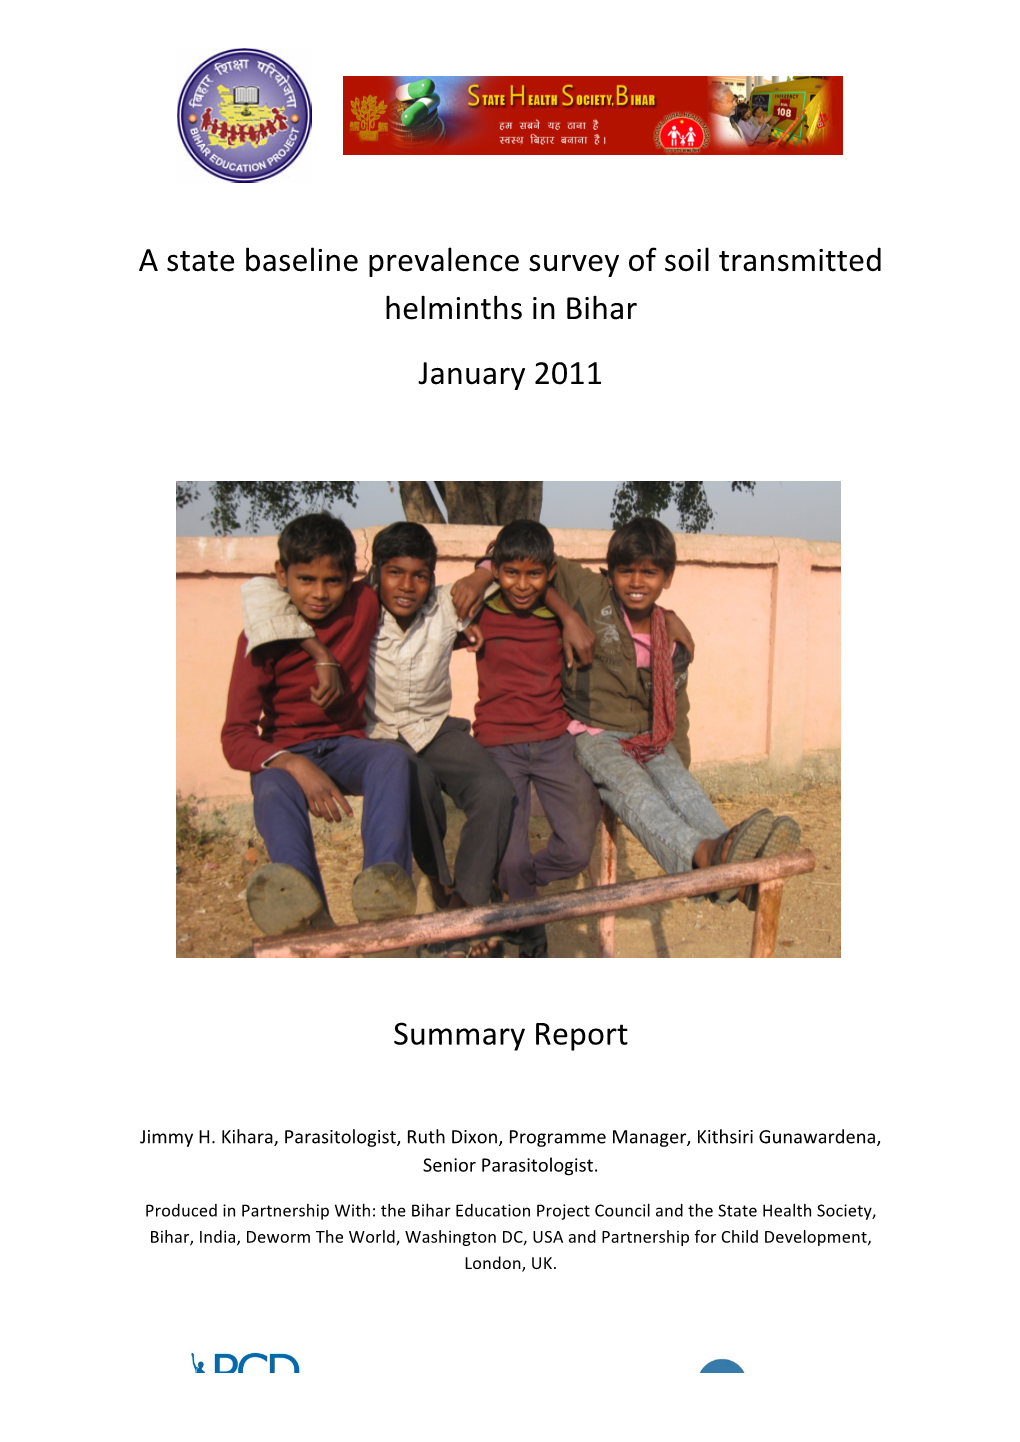 A State Baseline Prevalence Survey of Soil Transmitted Helminths in Bihar